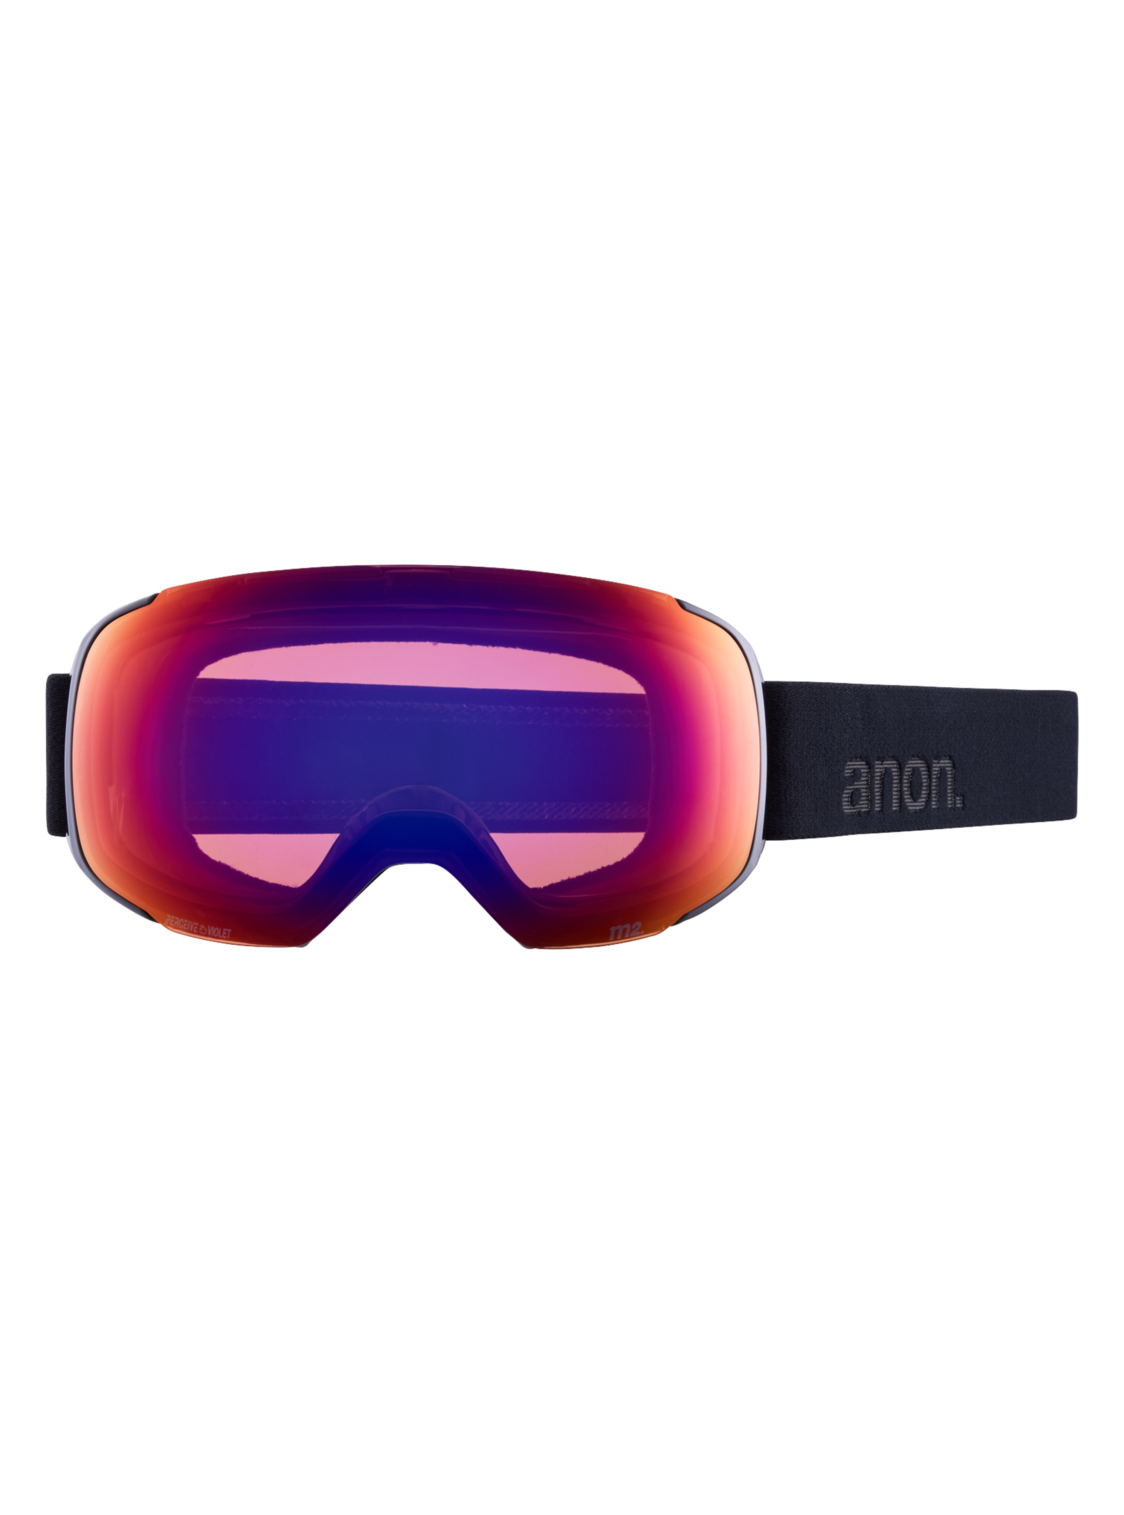 Anon M2 goggle black / perceive sun red (including extra lens)